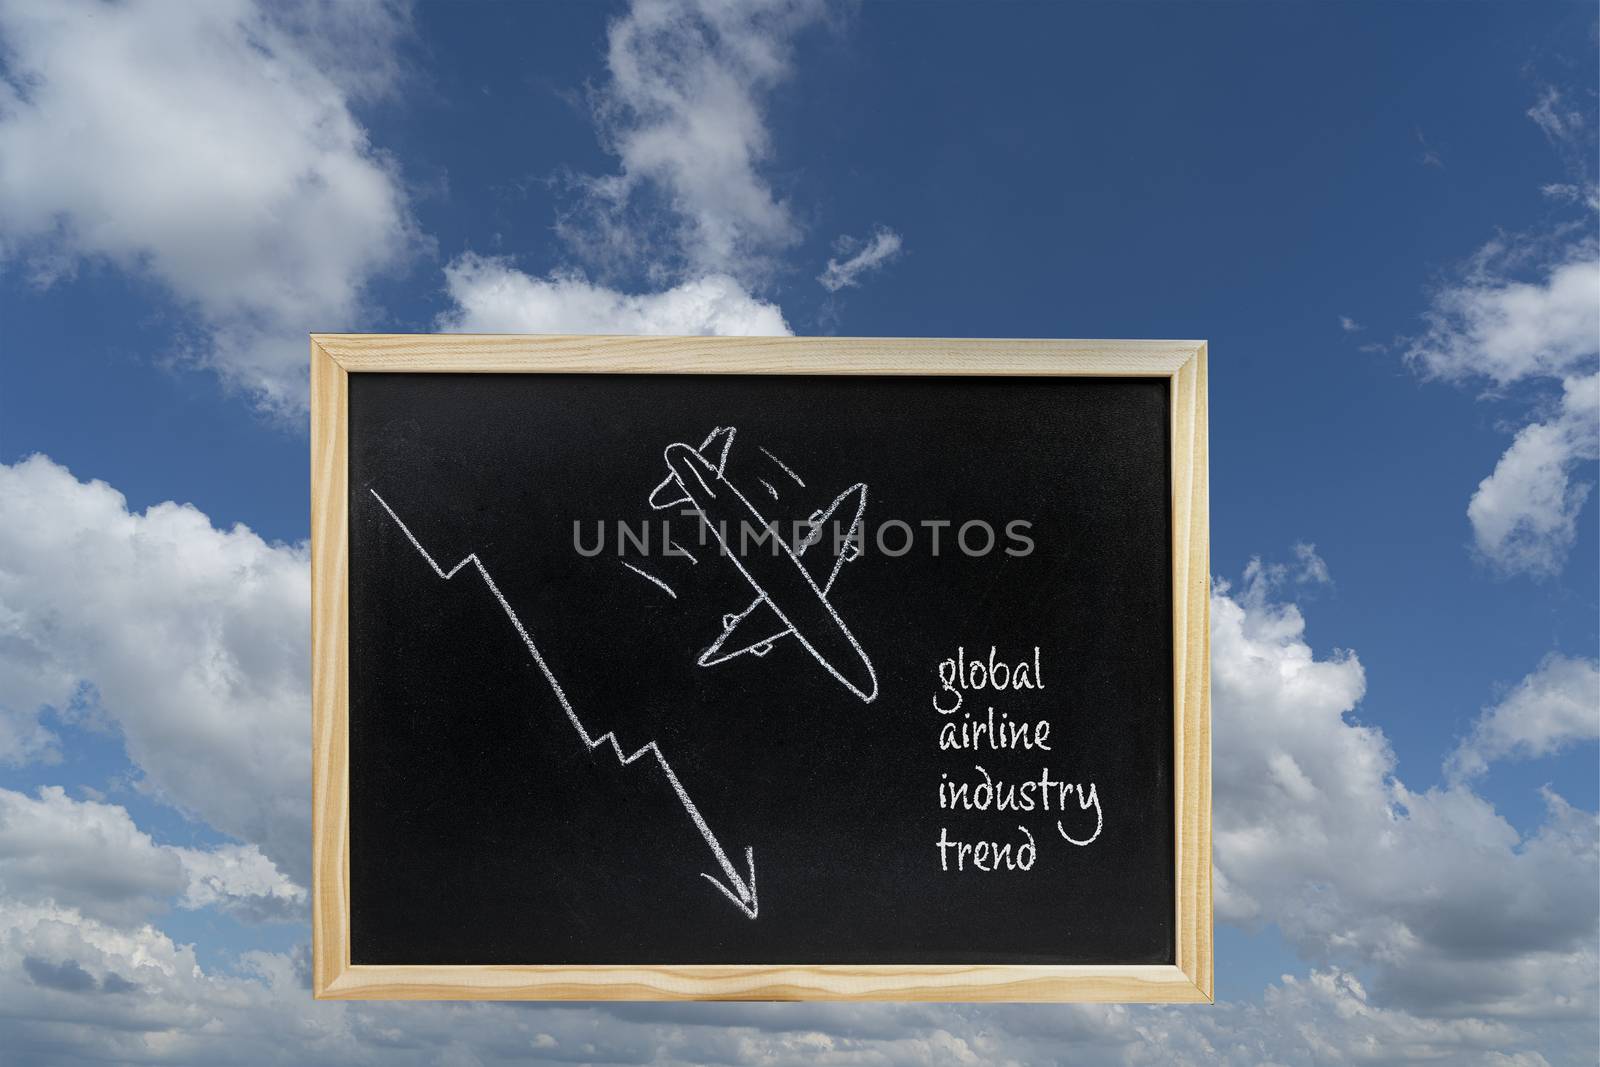 a blackboard with the Global Airline industry trend drawn